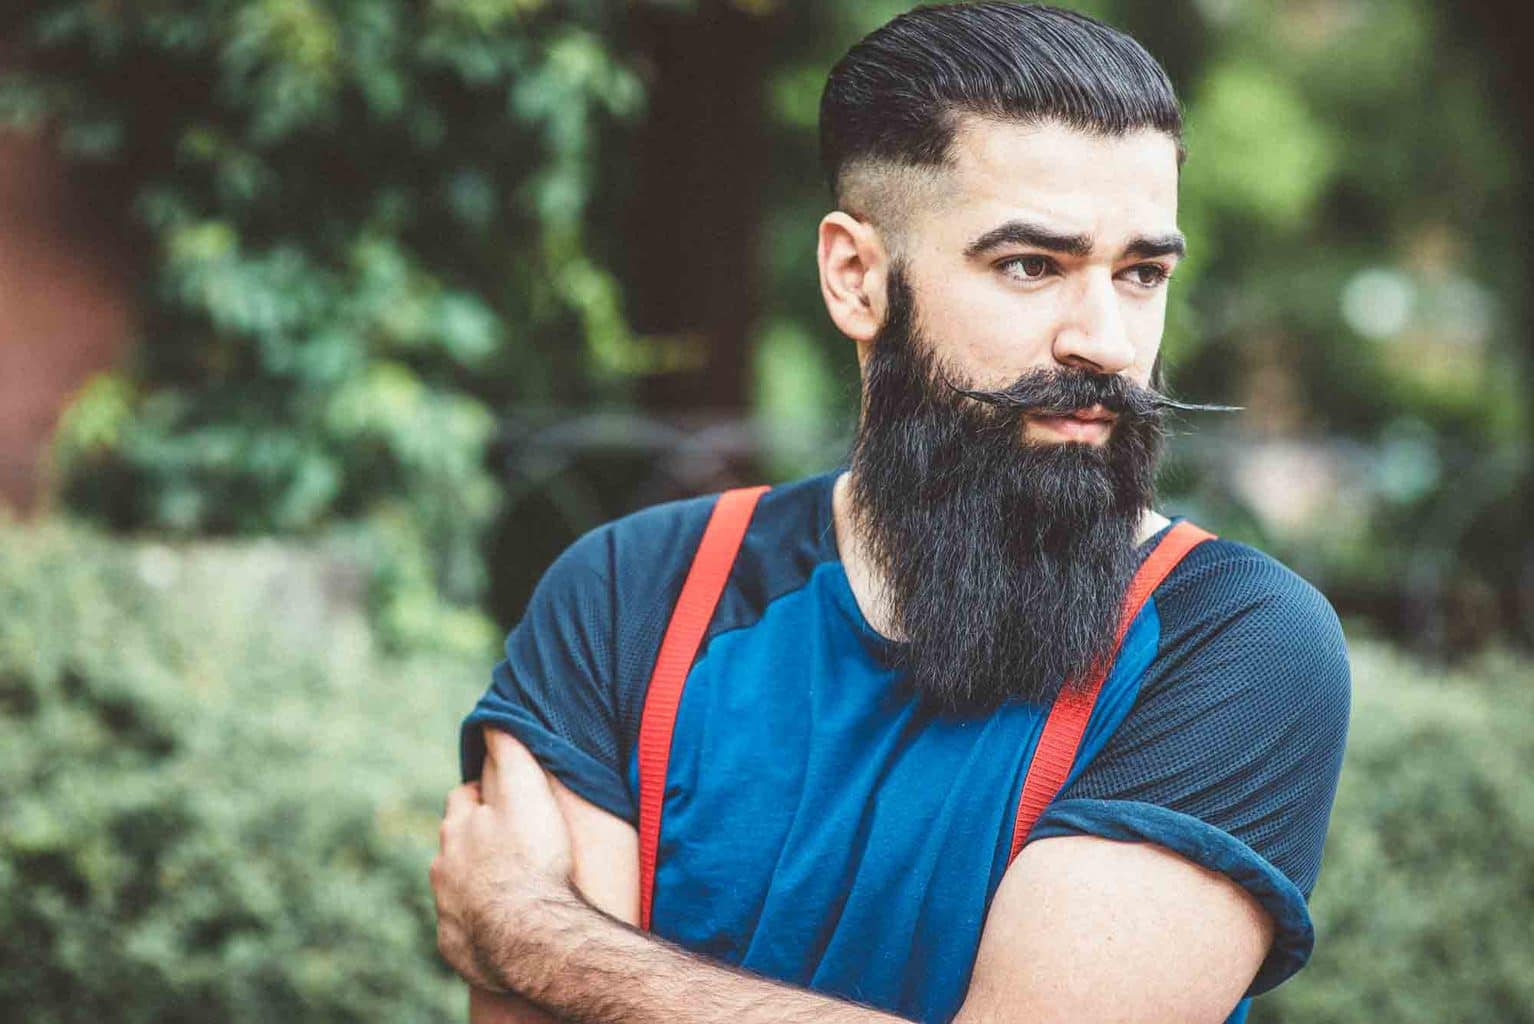 15 Handsome Balbo Beard Styles To Add Class to Your Look